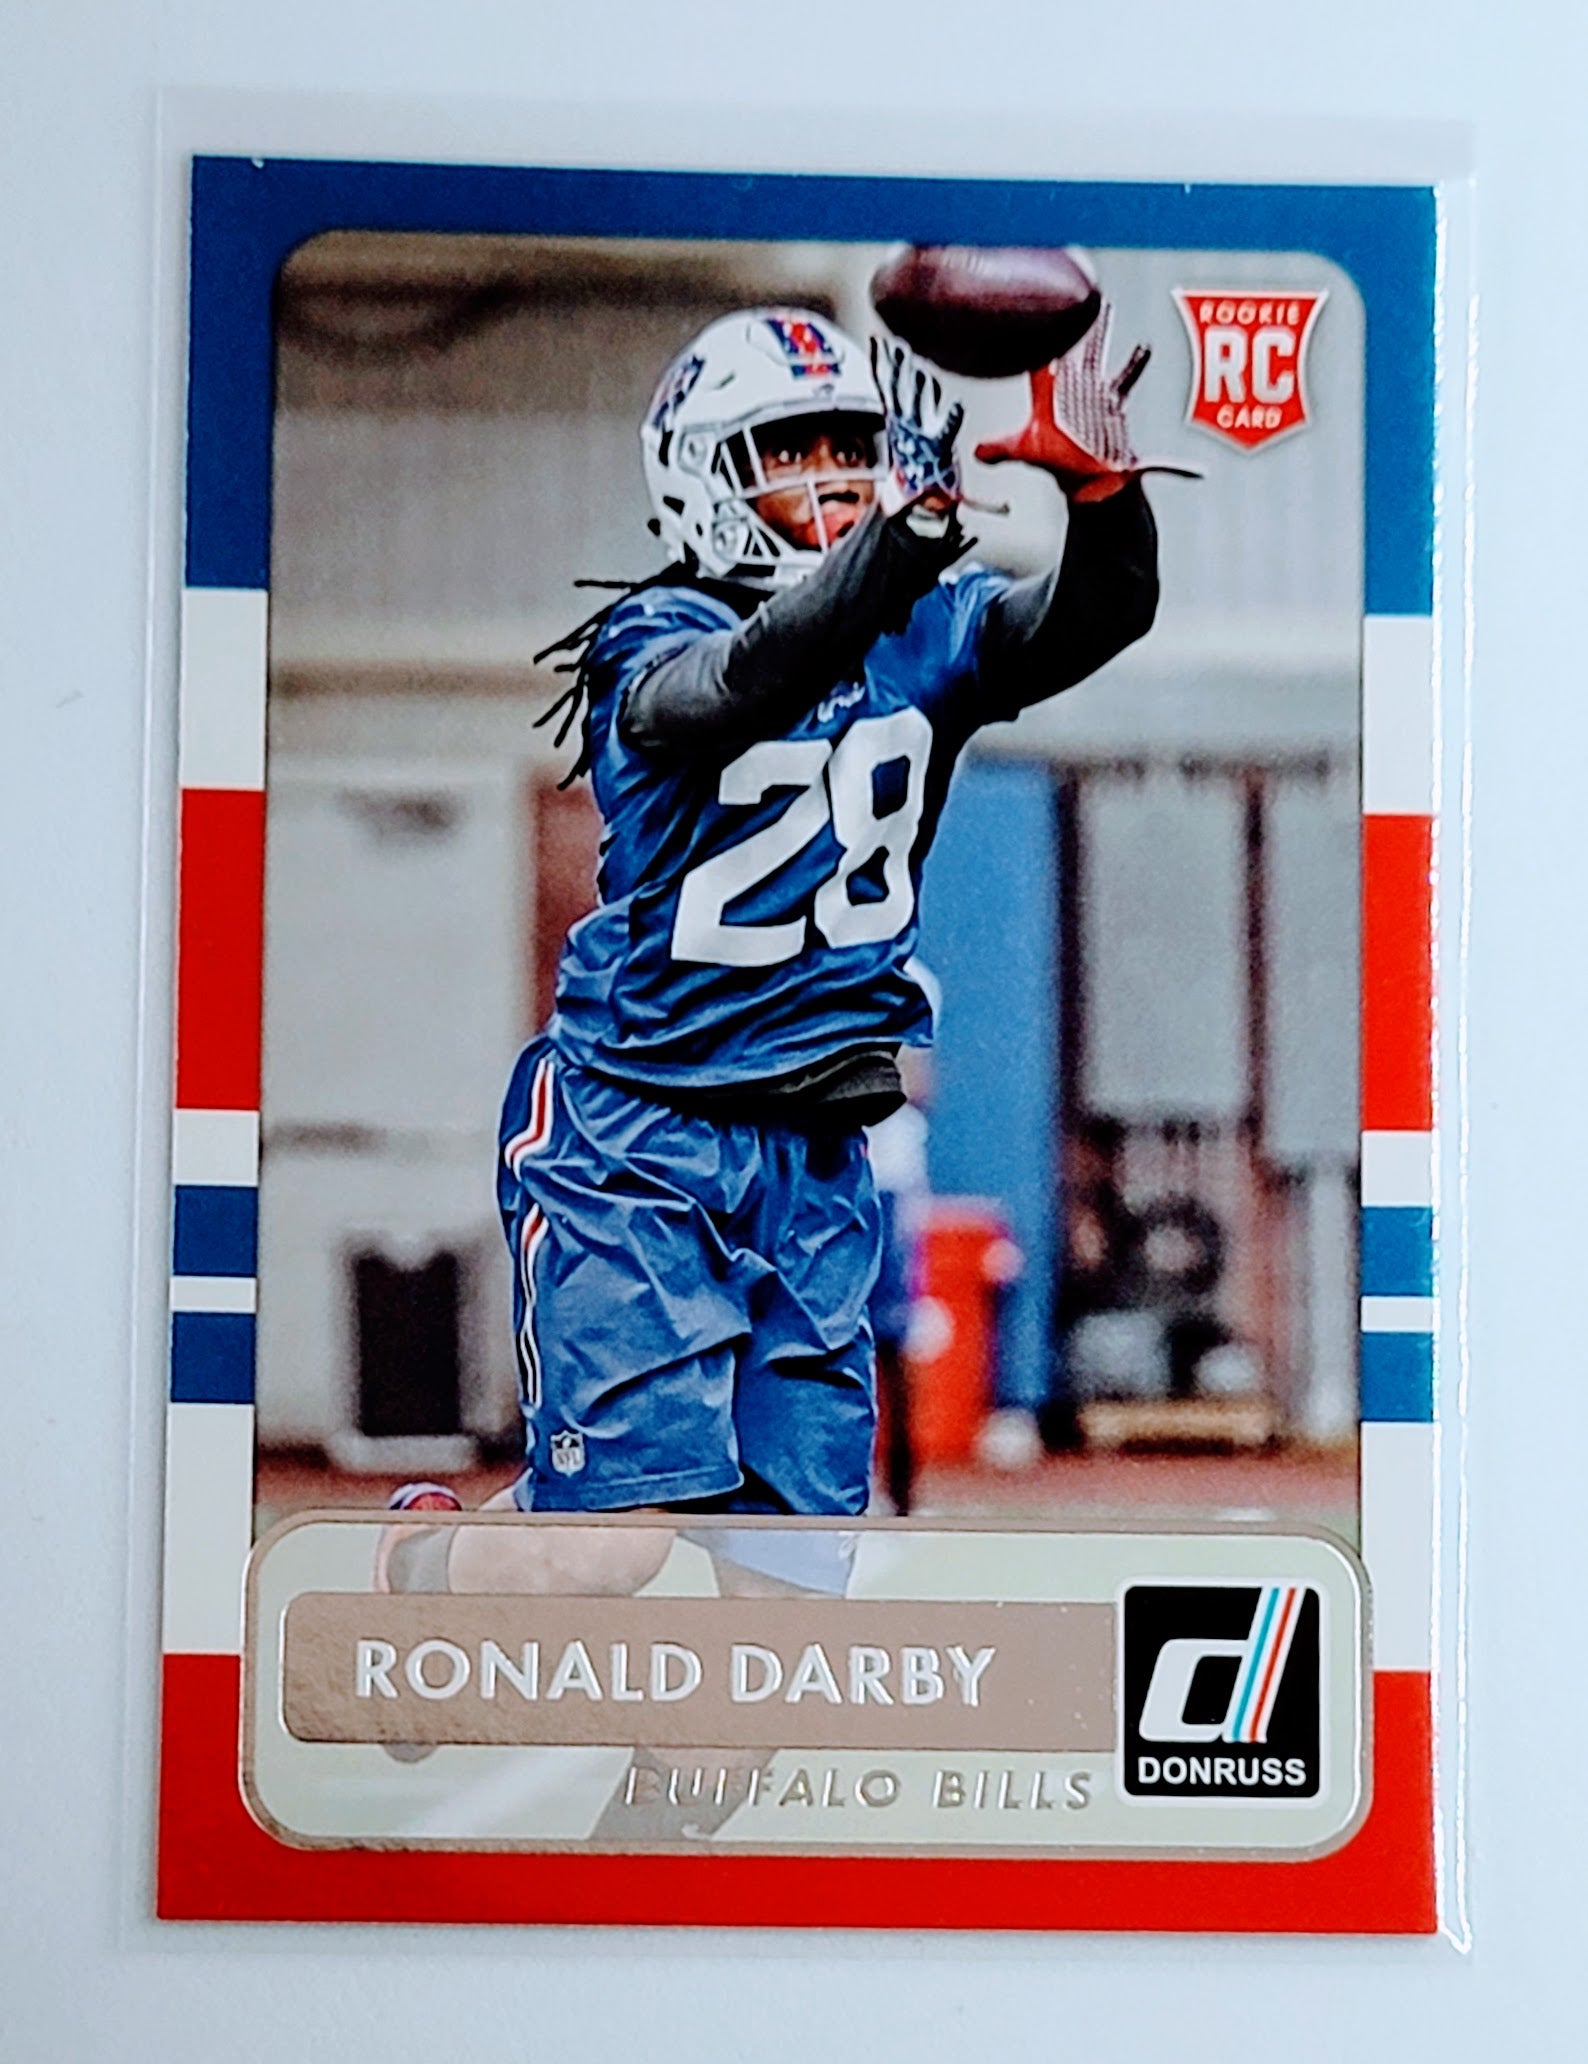 2015 Donruss Ronald Darby   RC Football Card  TH13C simple Xclusive Collectibles   